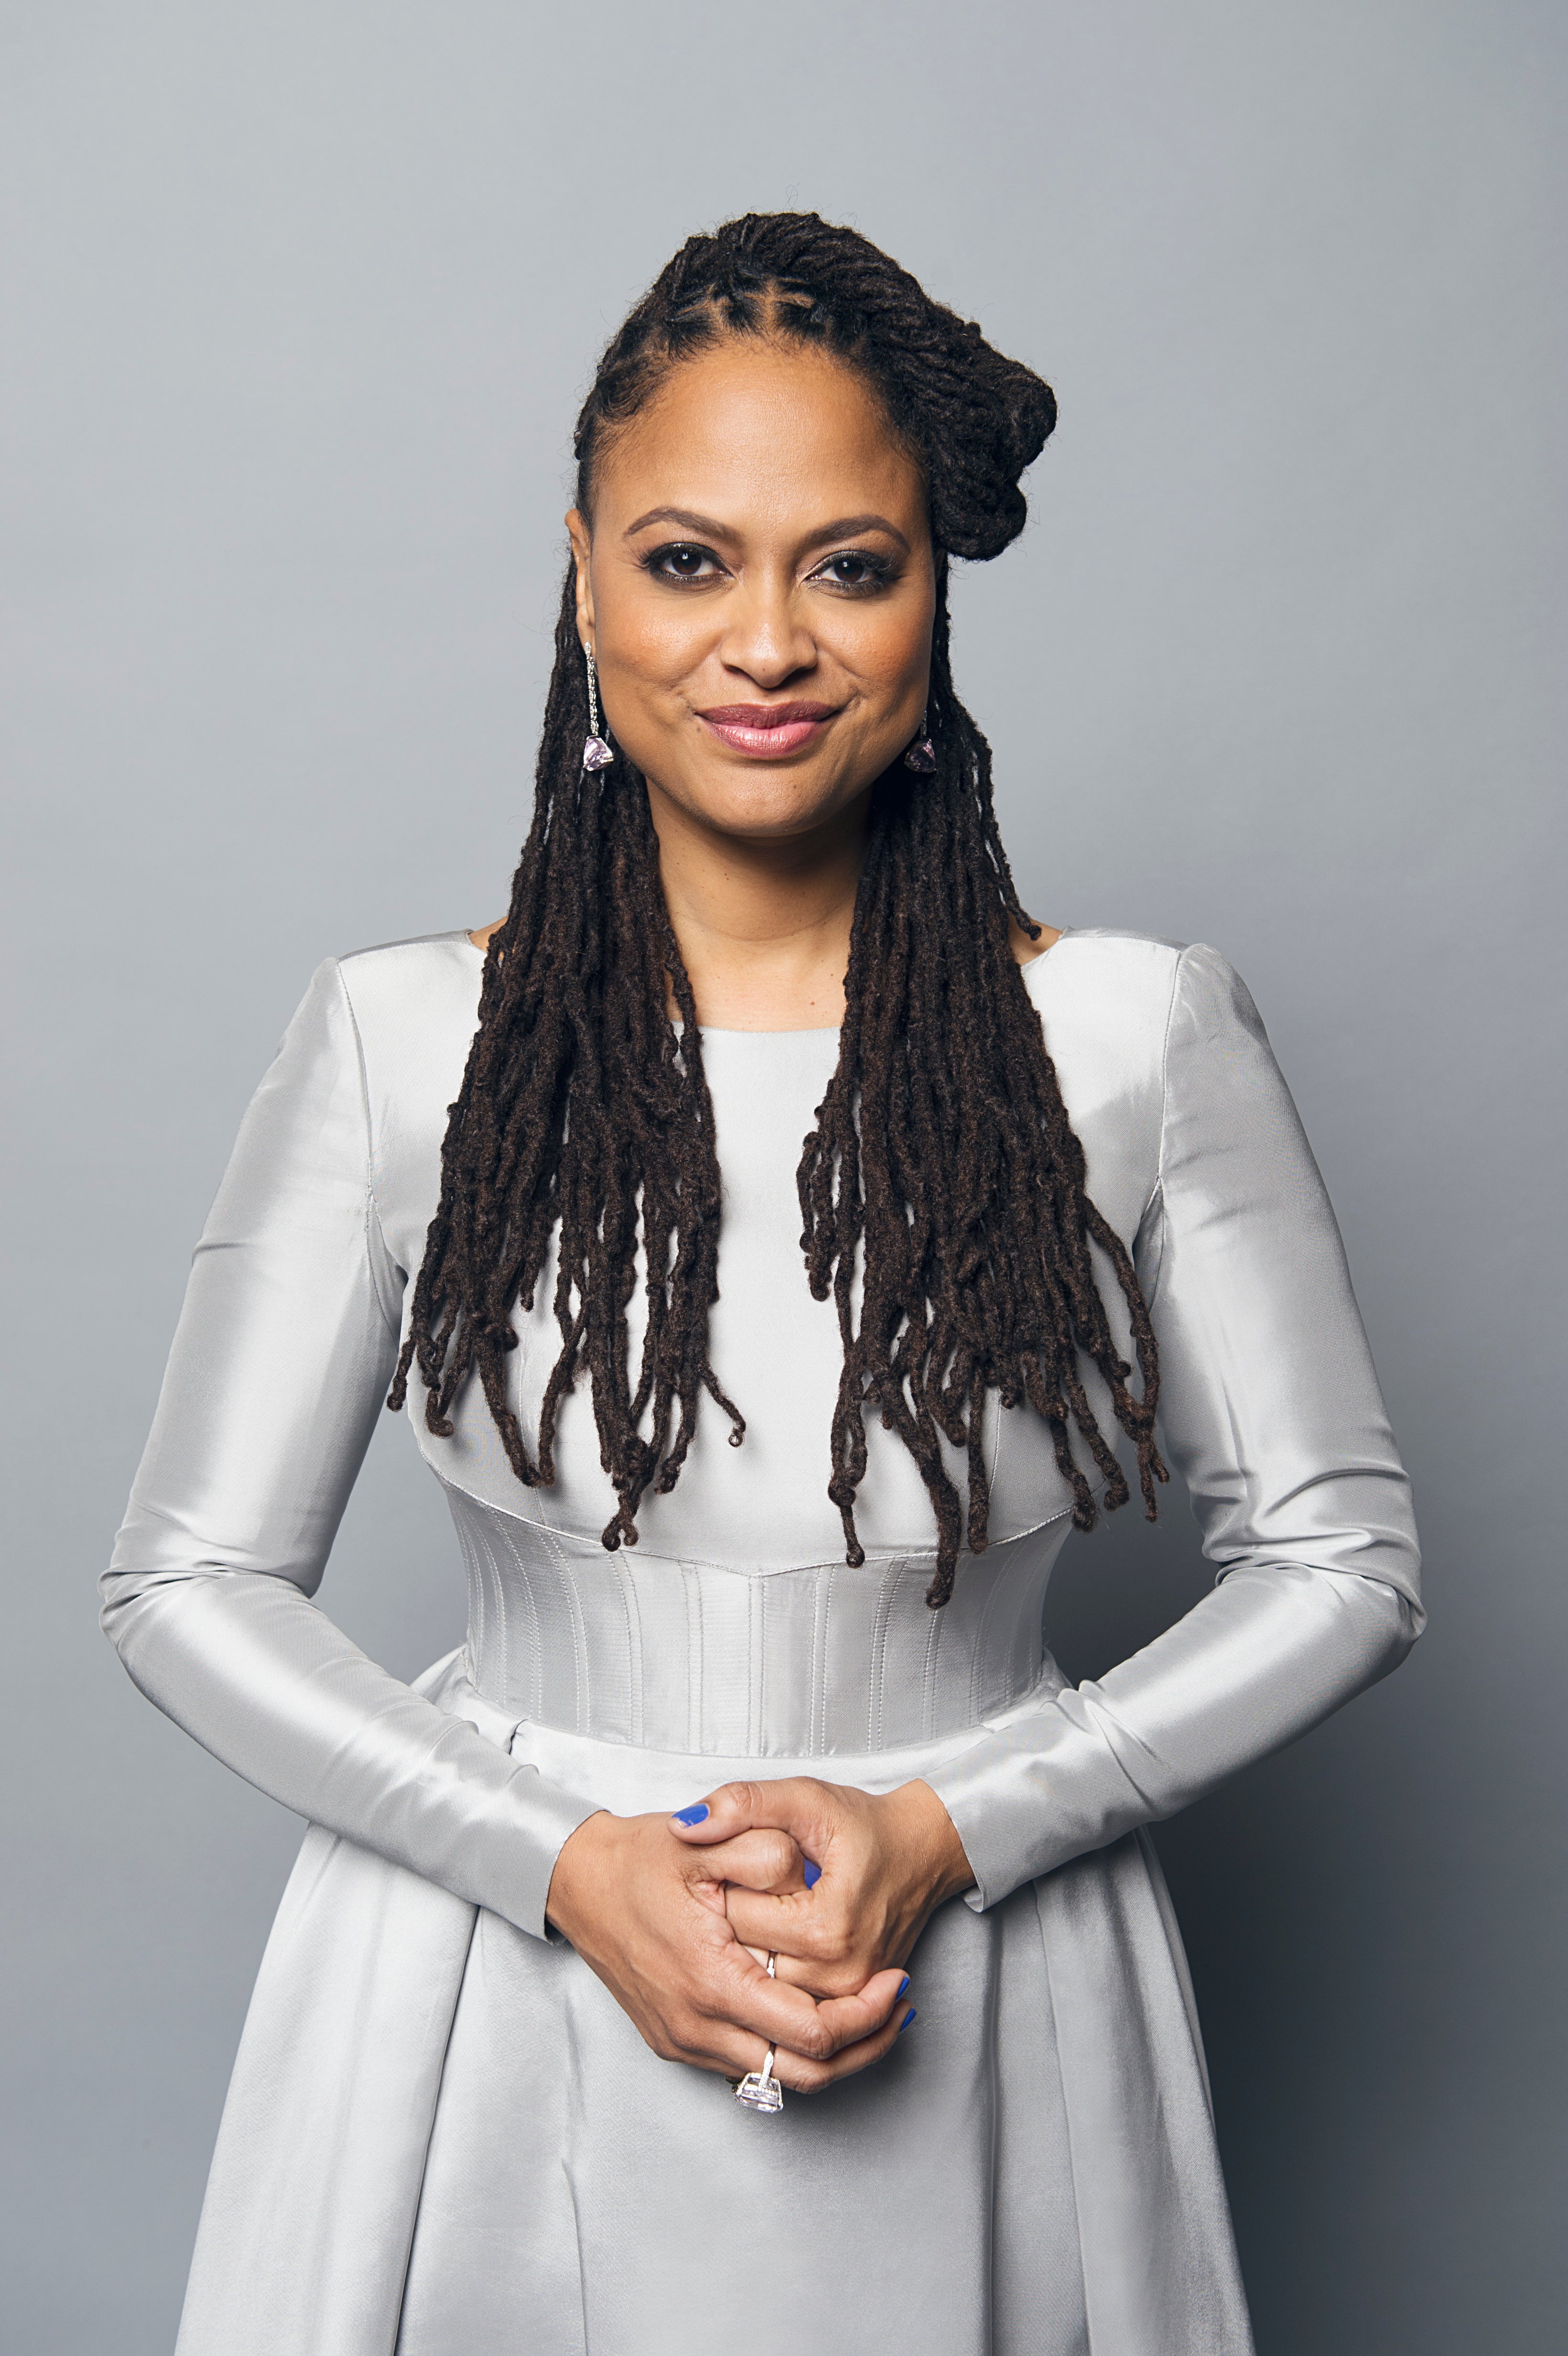 6 Ava DuVernay Quotes to Reaffirm Your #BlackGirlMagic
